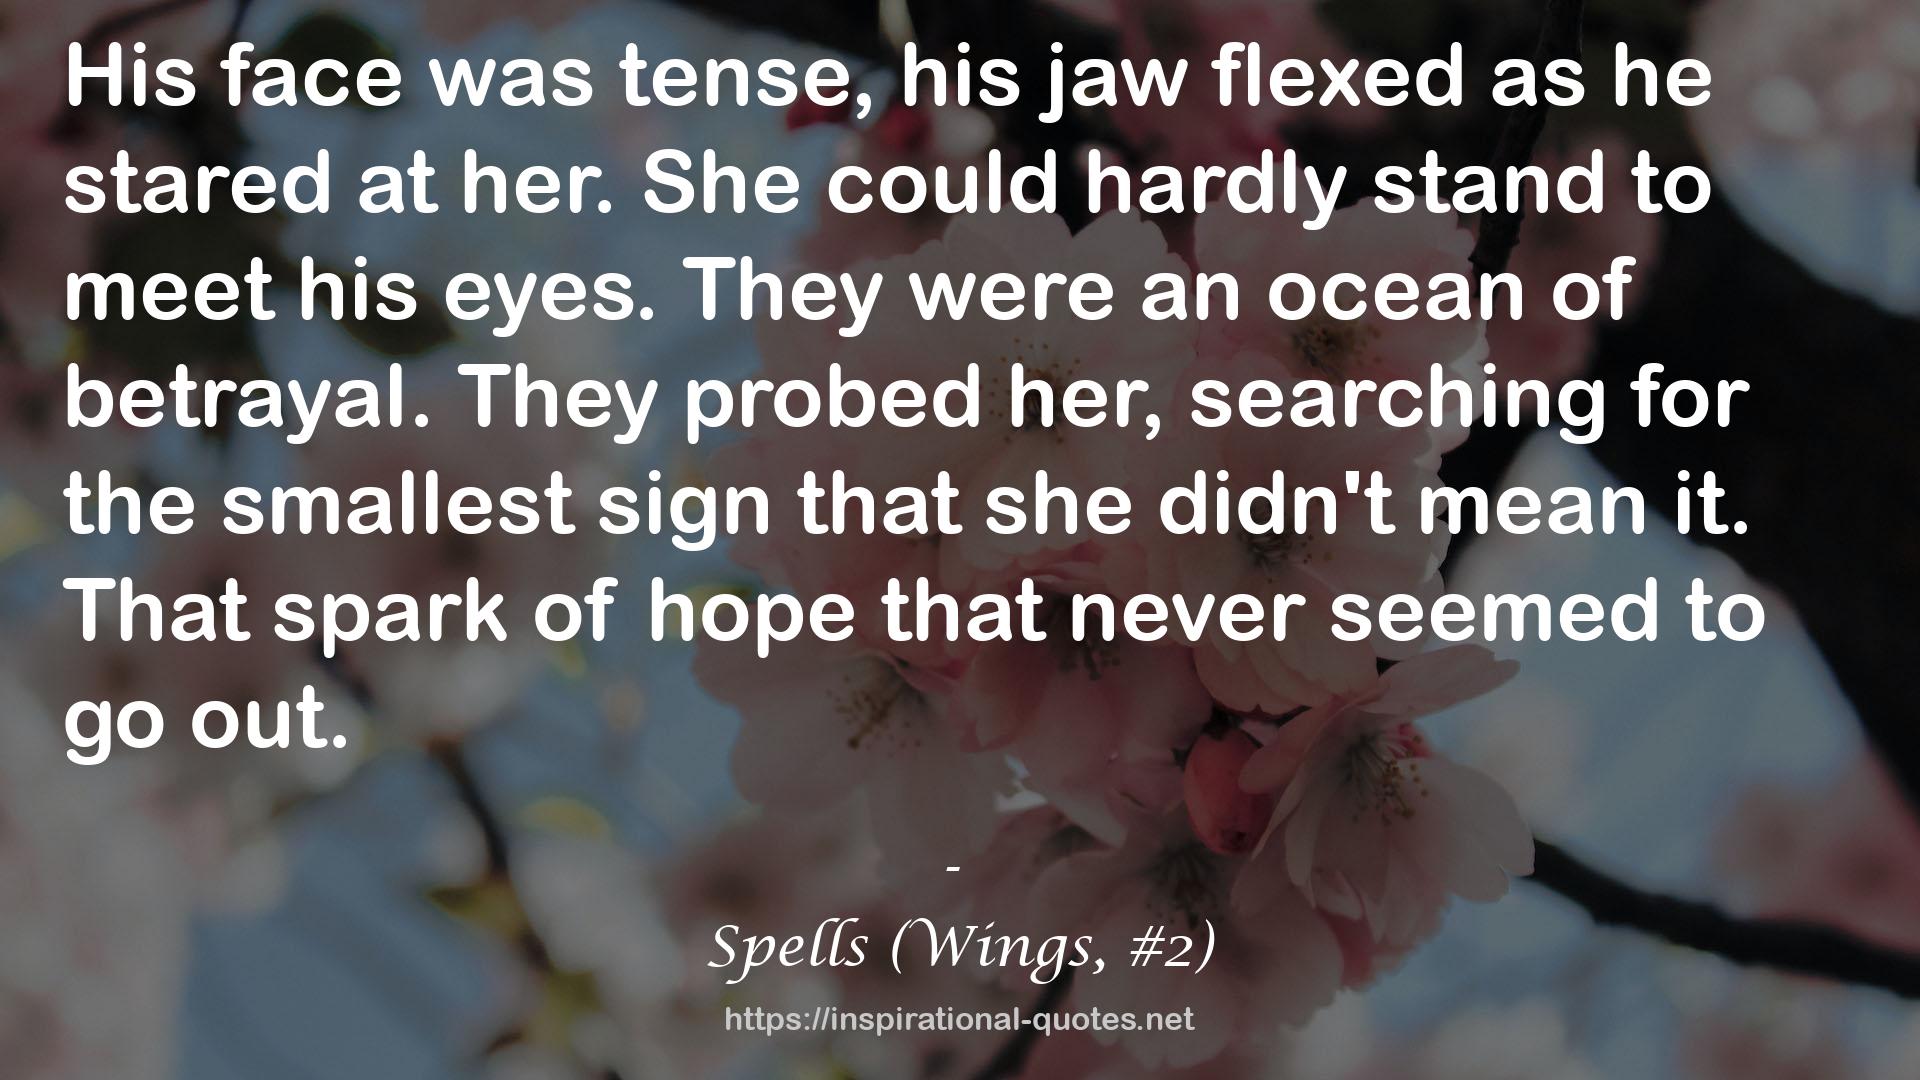 Spells (Wings, #2) QUOTES